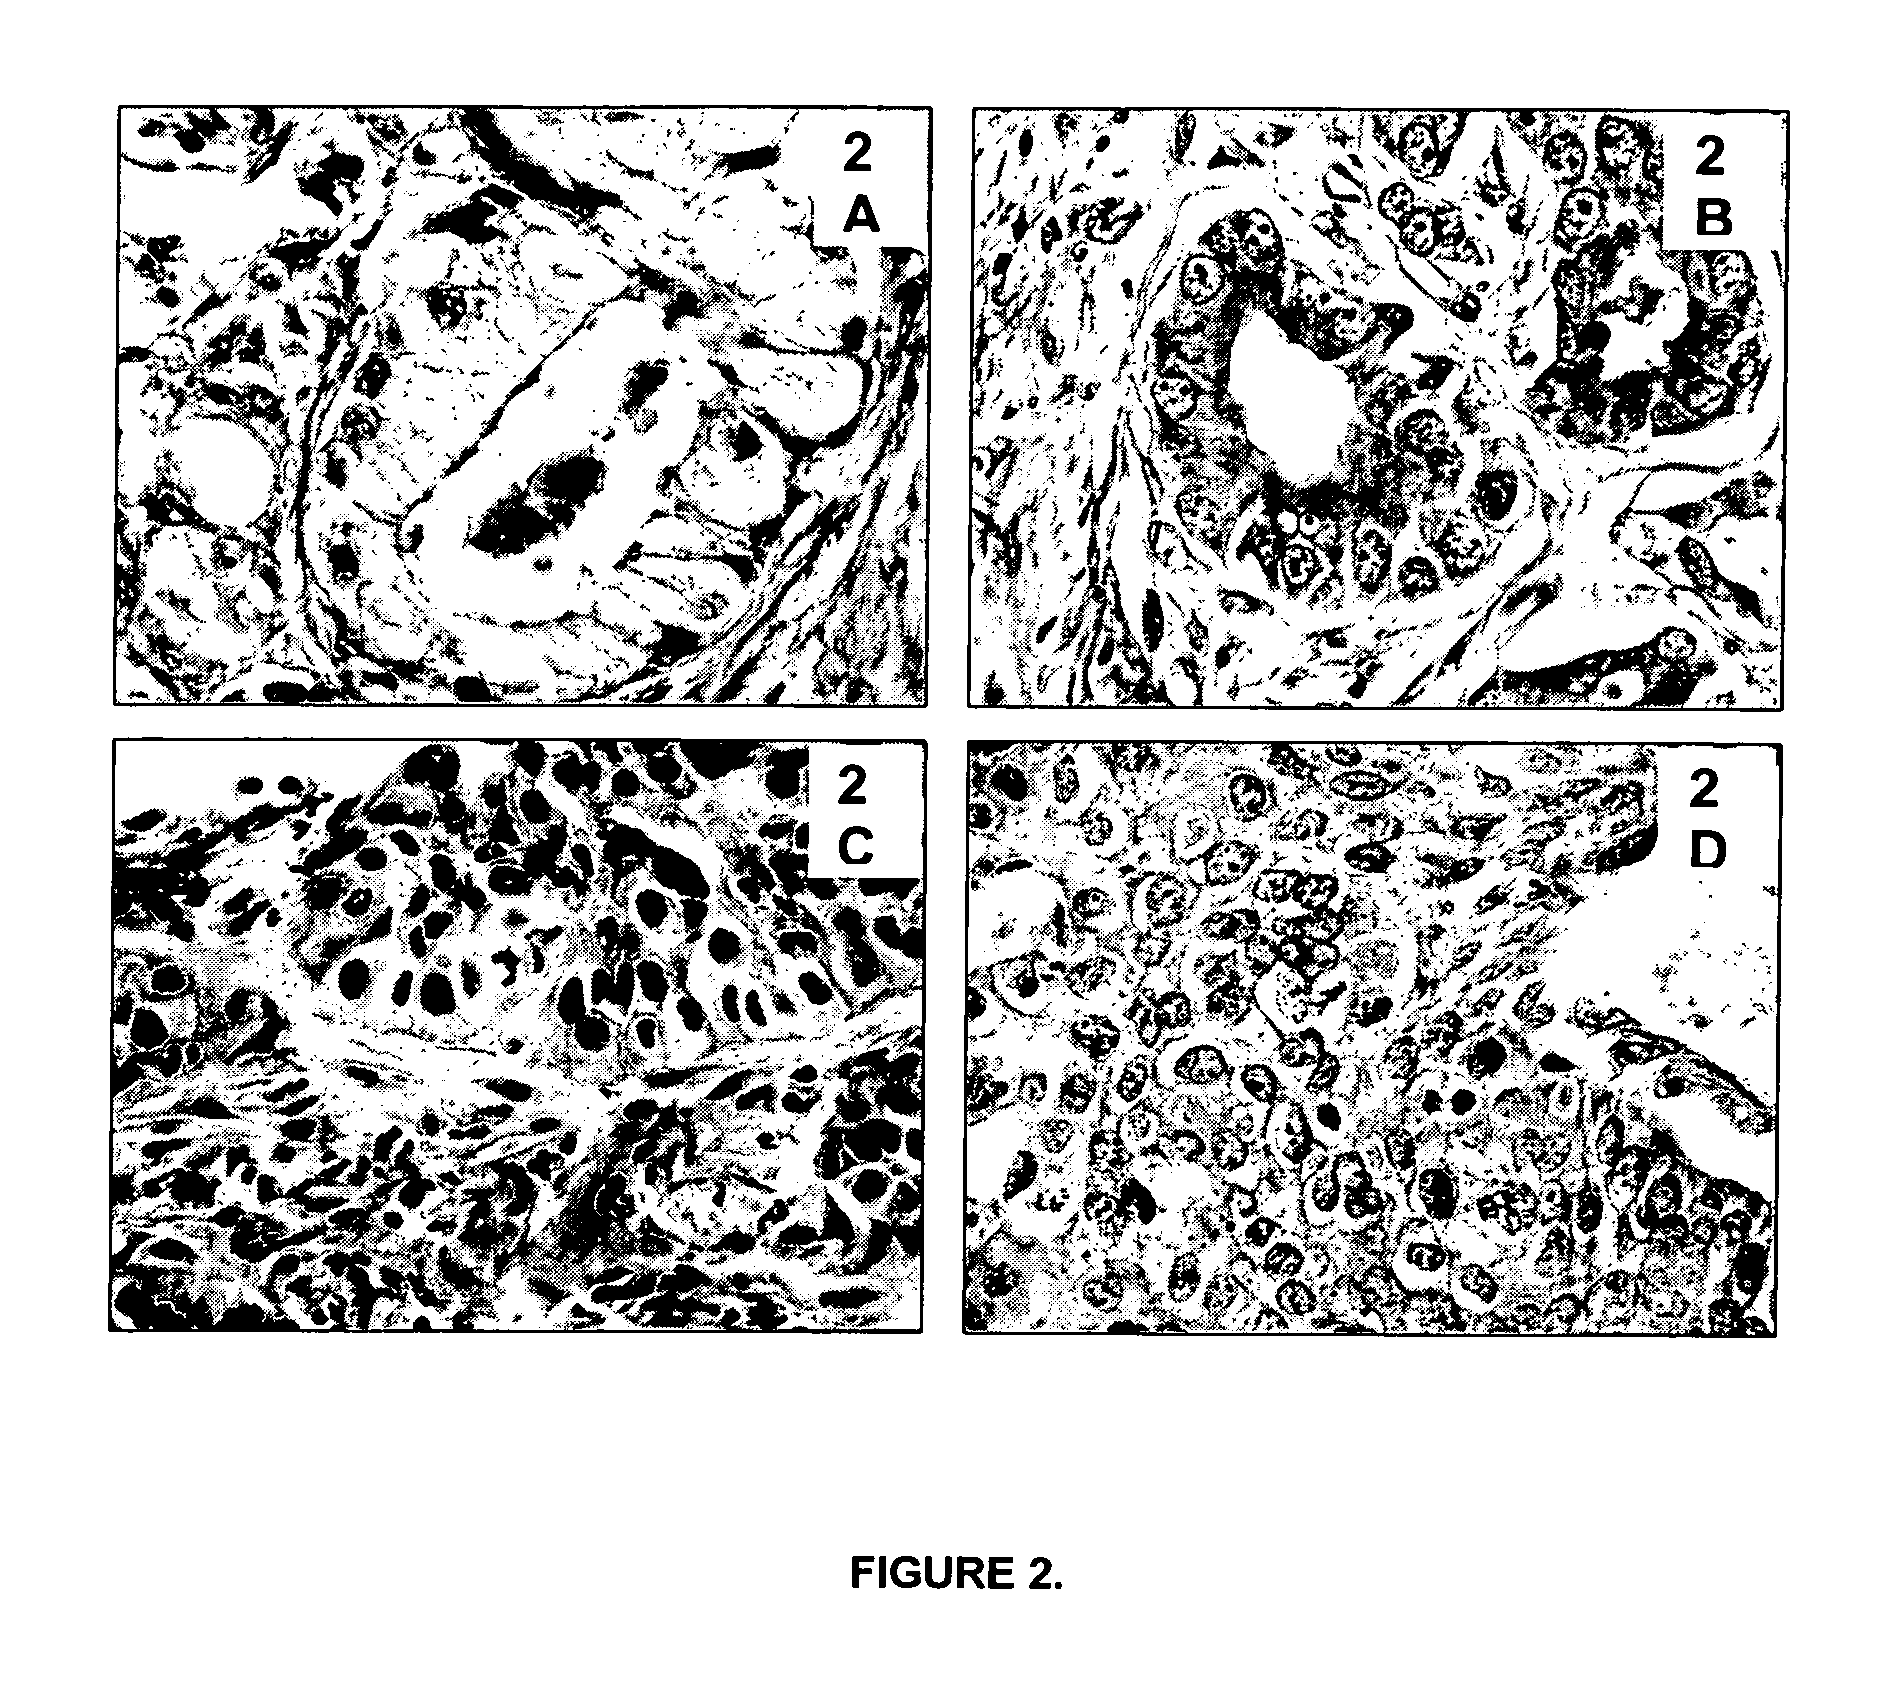 Methods, Reagents and Instrumentation for Preparing Impregnated Tissue Samples Suitable for Histopathological and Molecular Studies